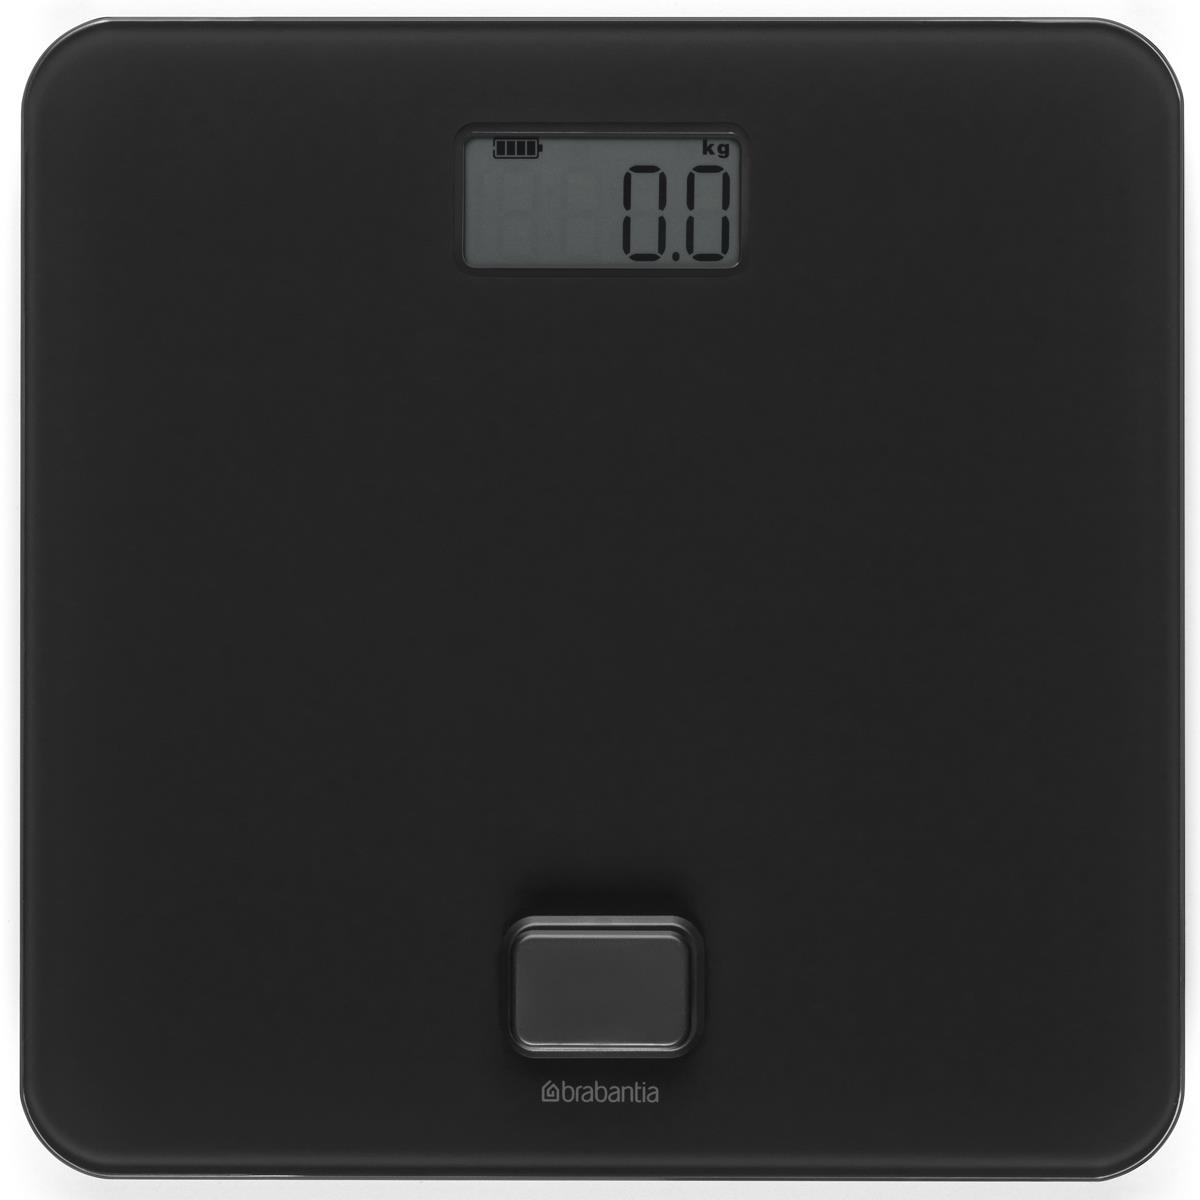 Brabantia Battery Free Bathroom Scale Questions & Answers